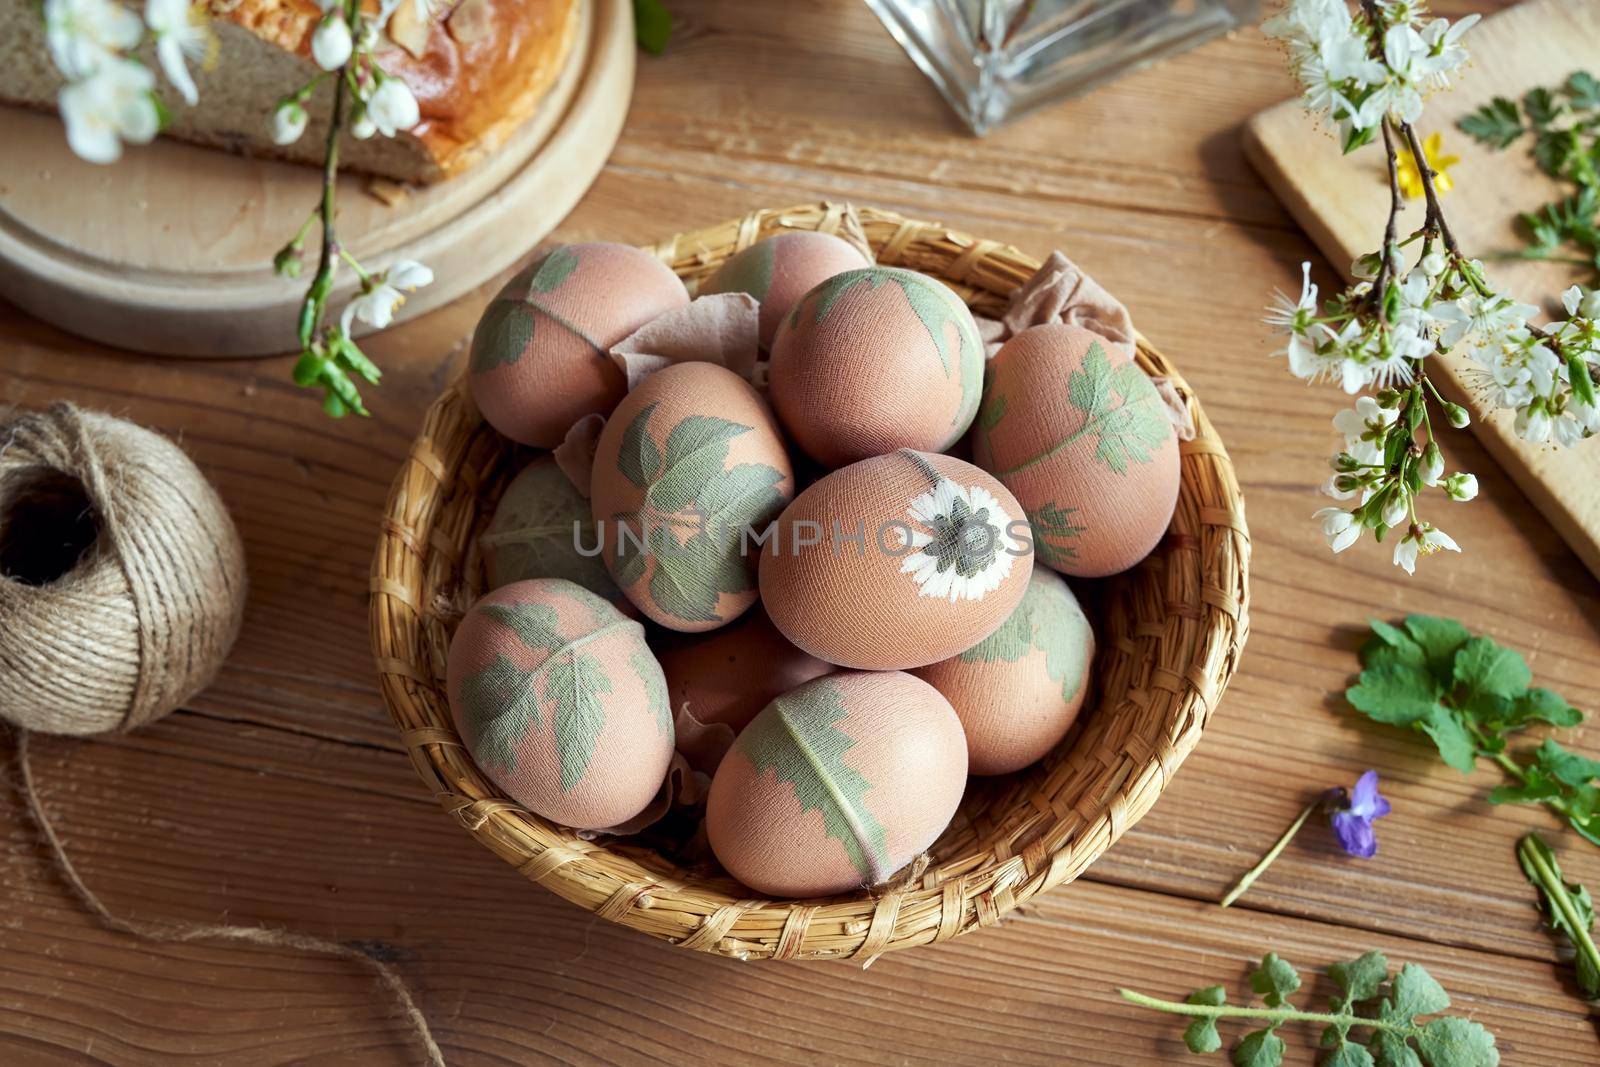 Preparation of Easter eggs for dyeing with onion peels by madeleine_steinbach